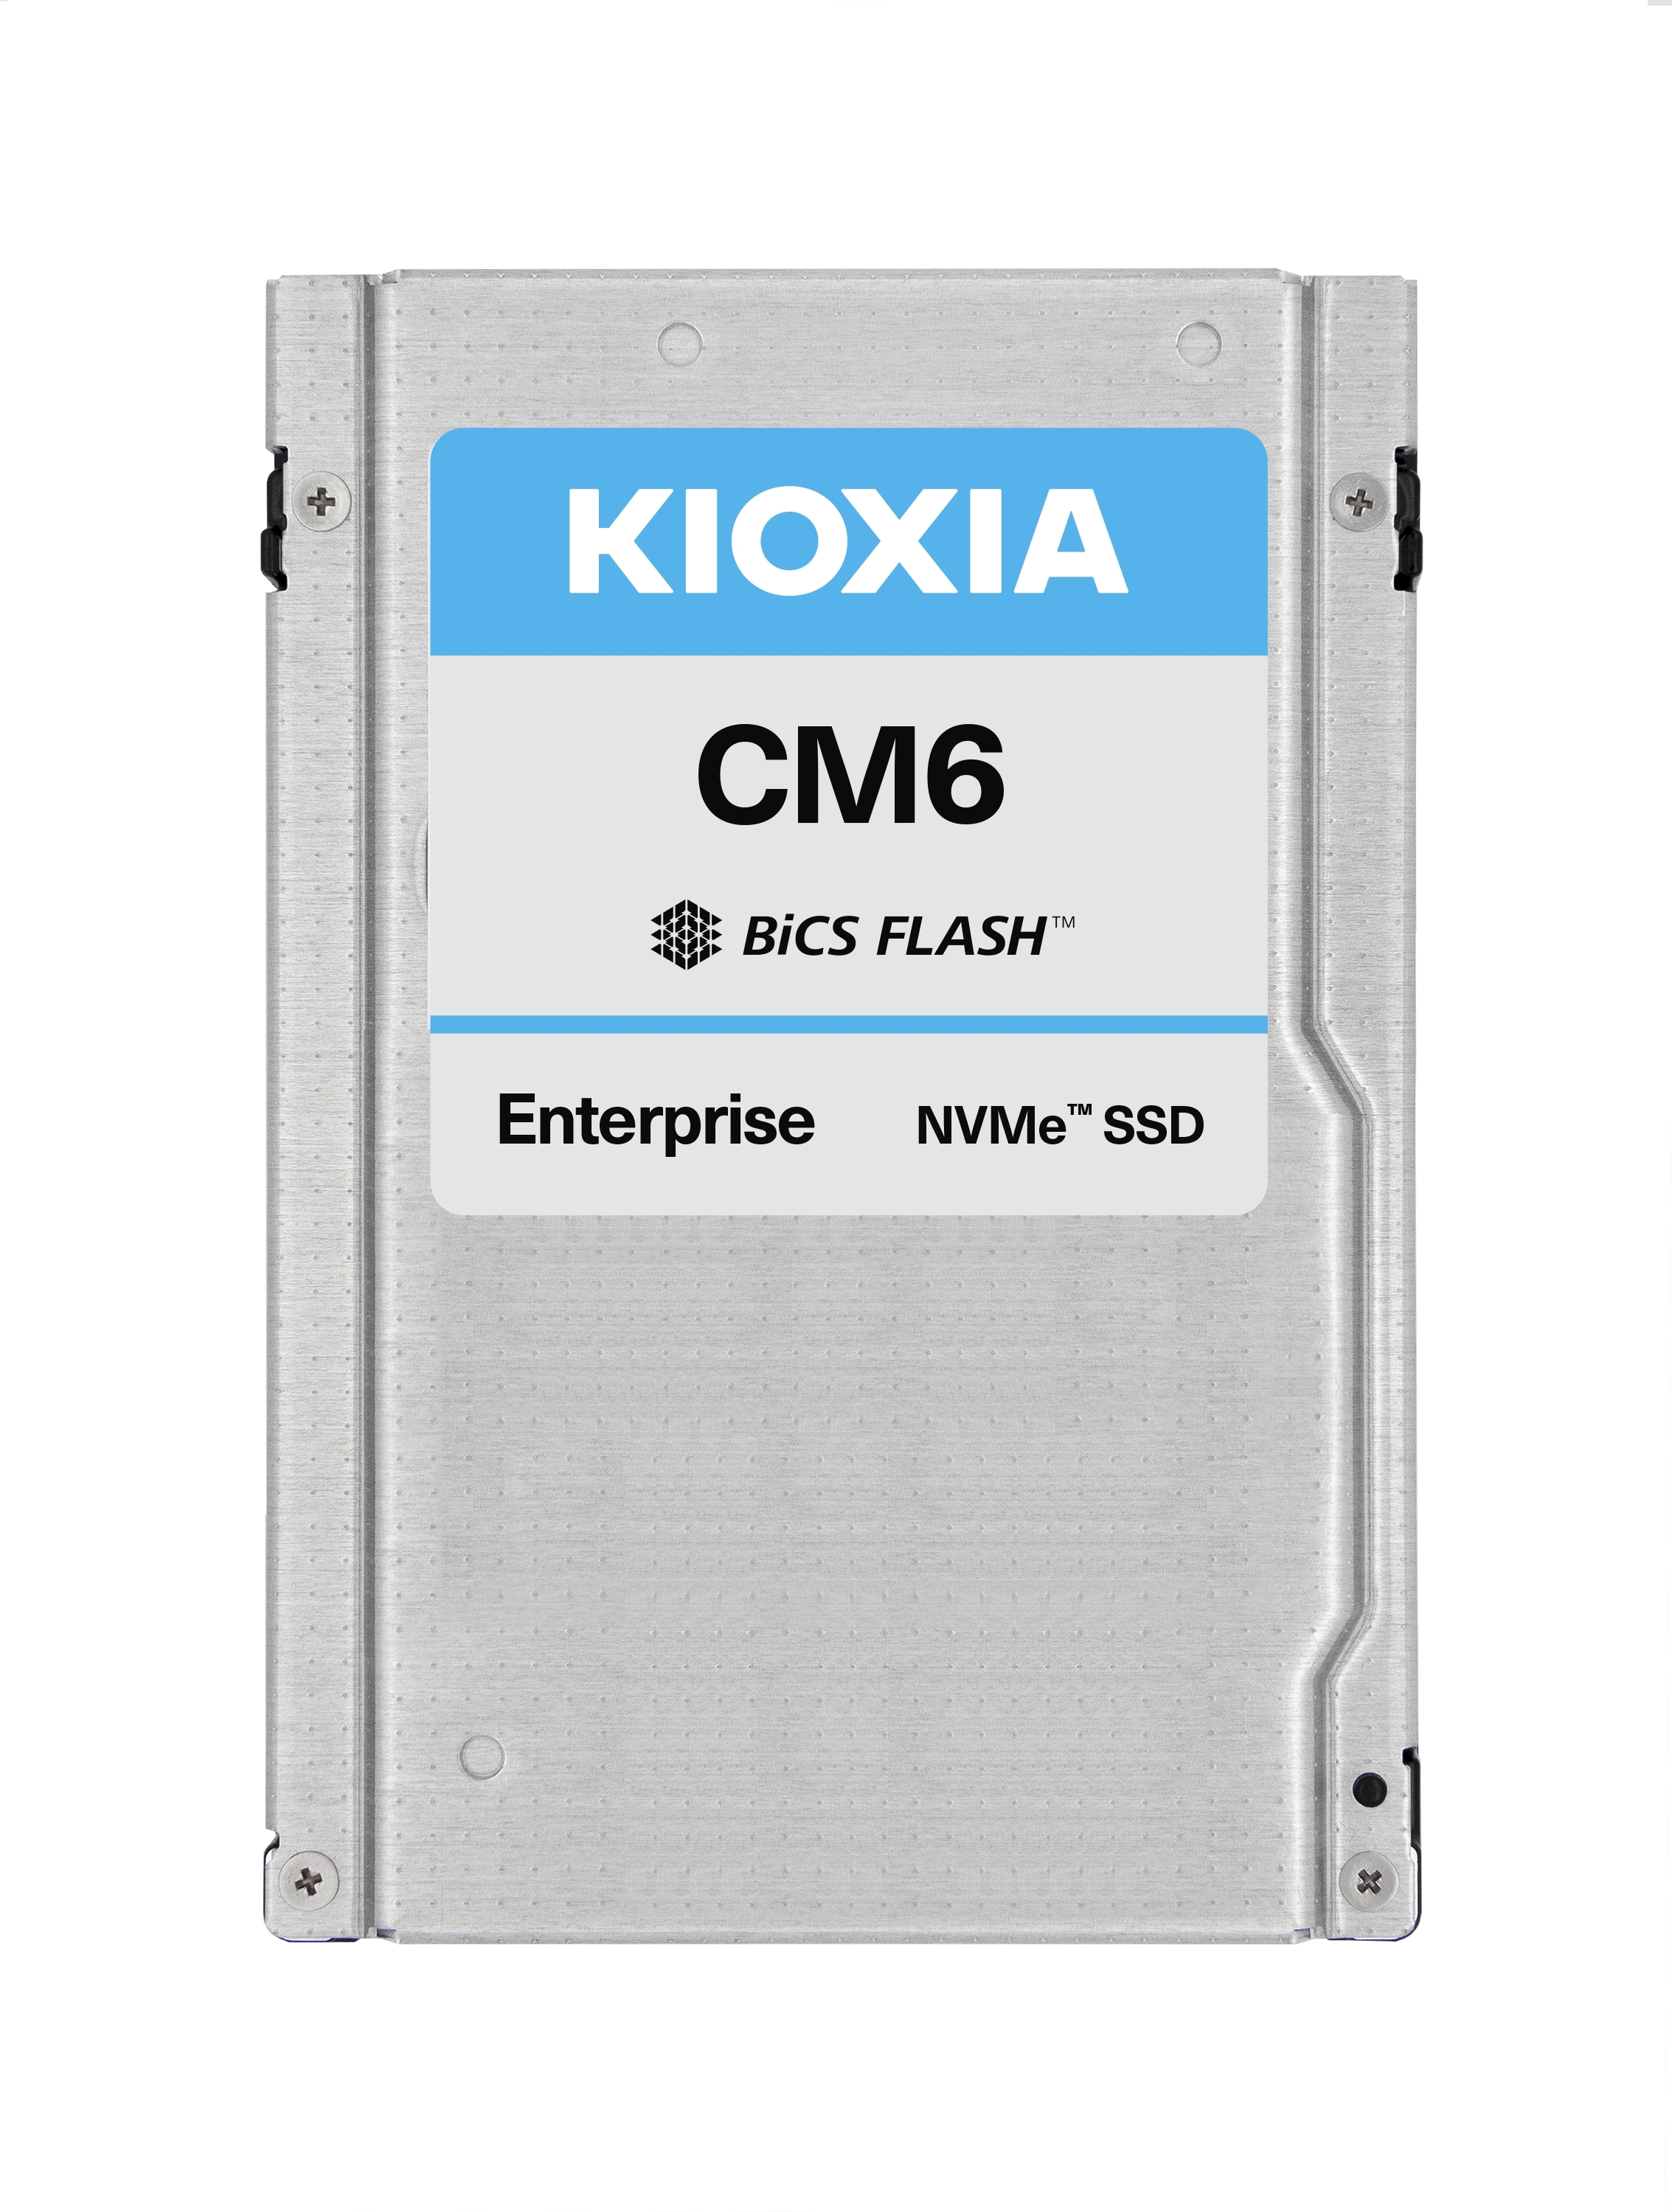 KIOXIA First to Deliver Enterprise and Data Center PCIe U.3 Solid State Drives | Business Wire